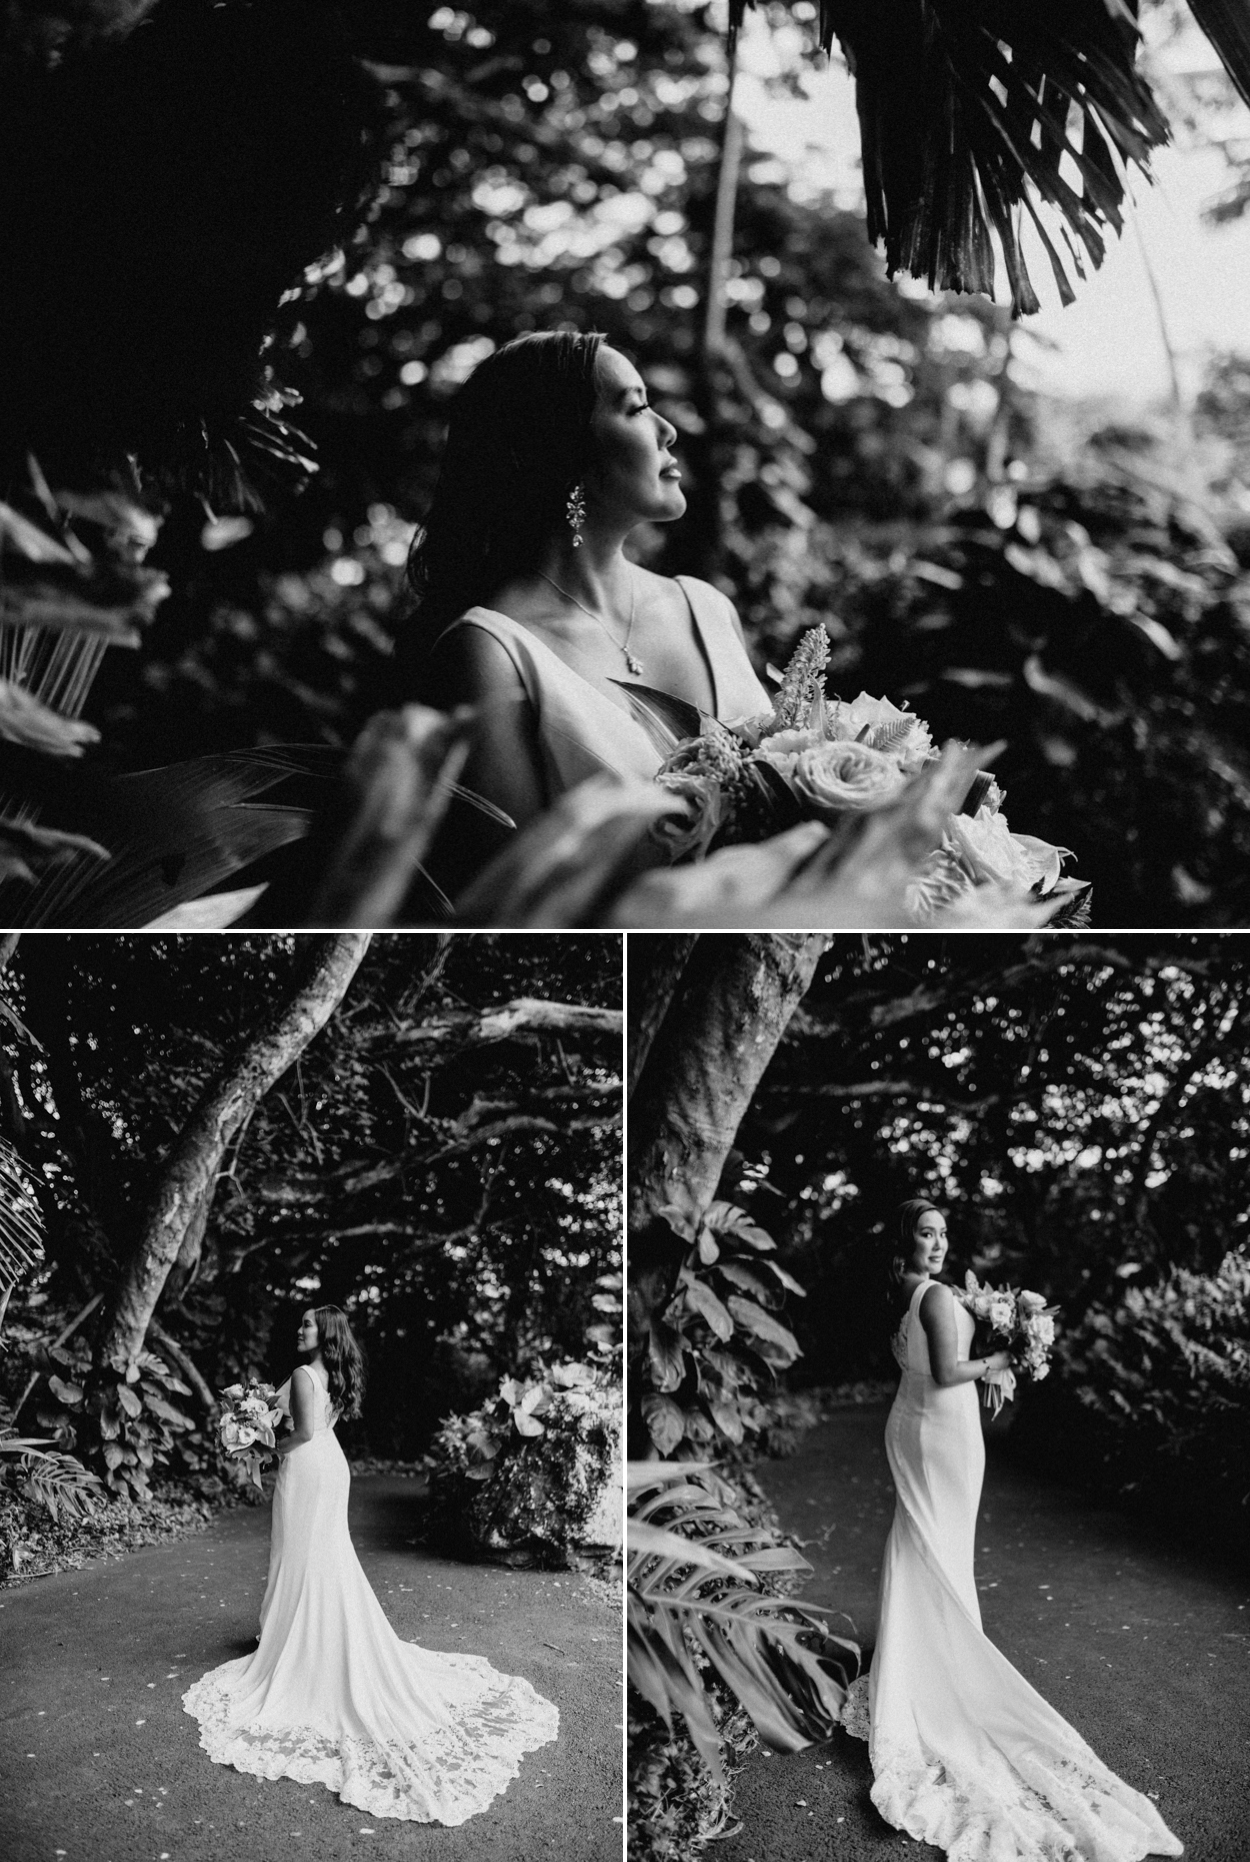 Moli'i fishpond Hawaii wedding bride holding her bouquet black and white